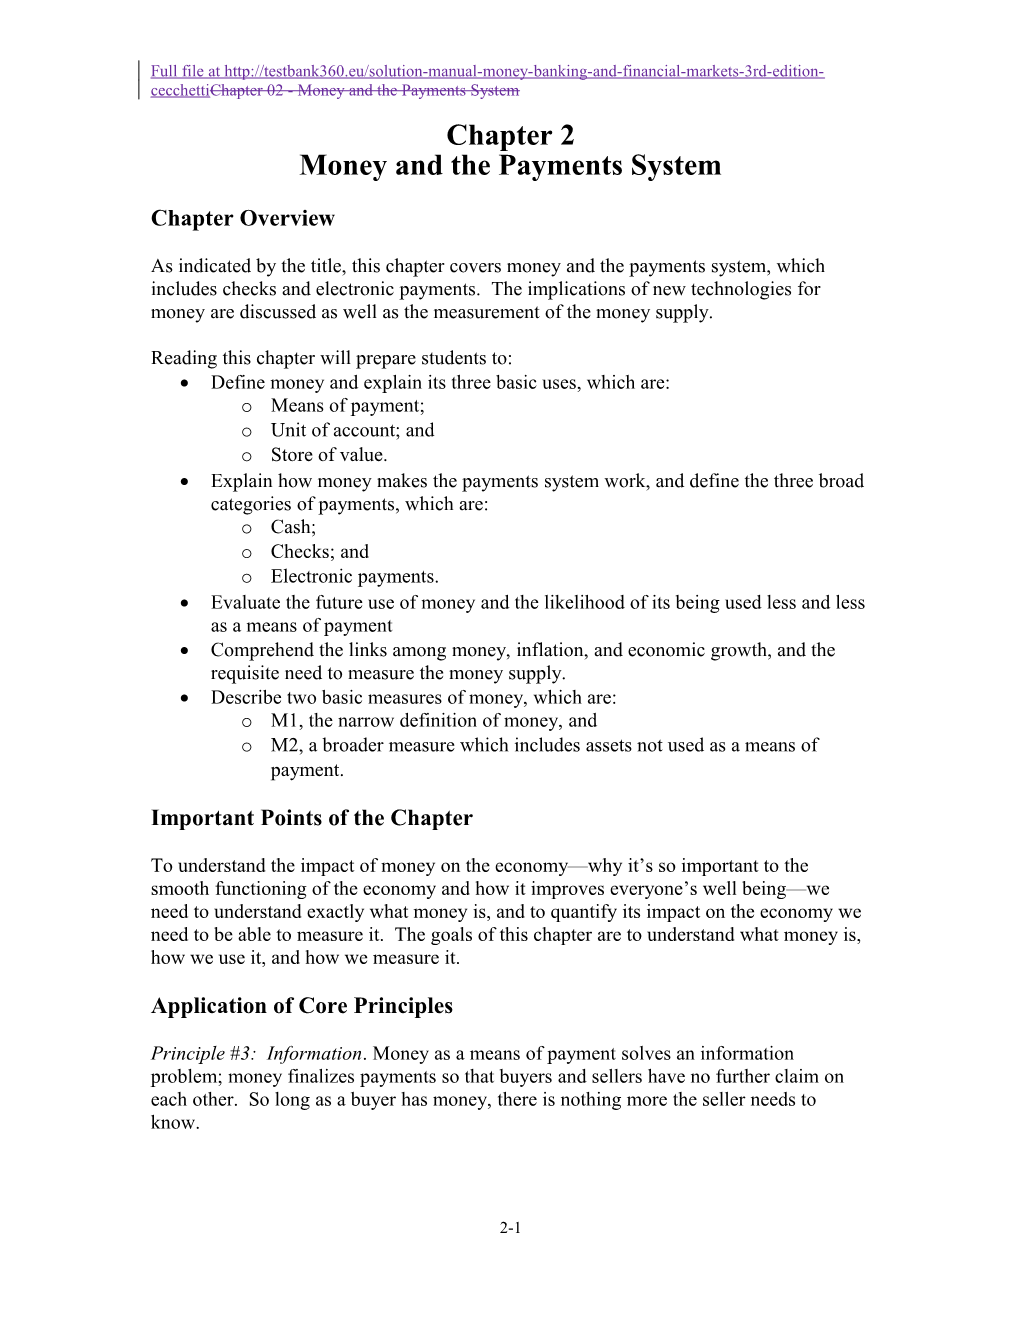 Full File at 02 - Money and the Payments System